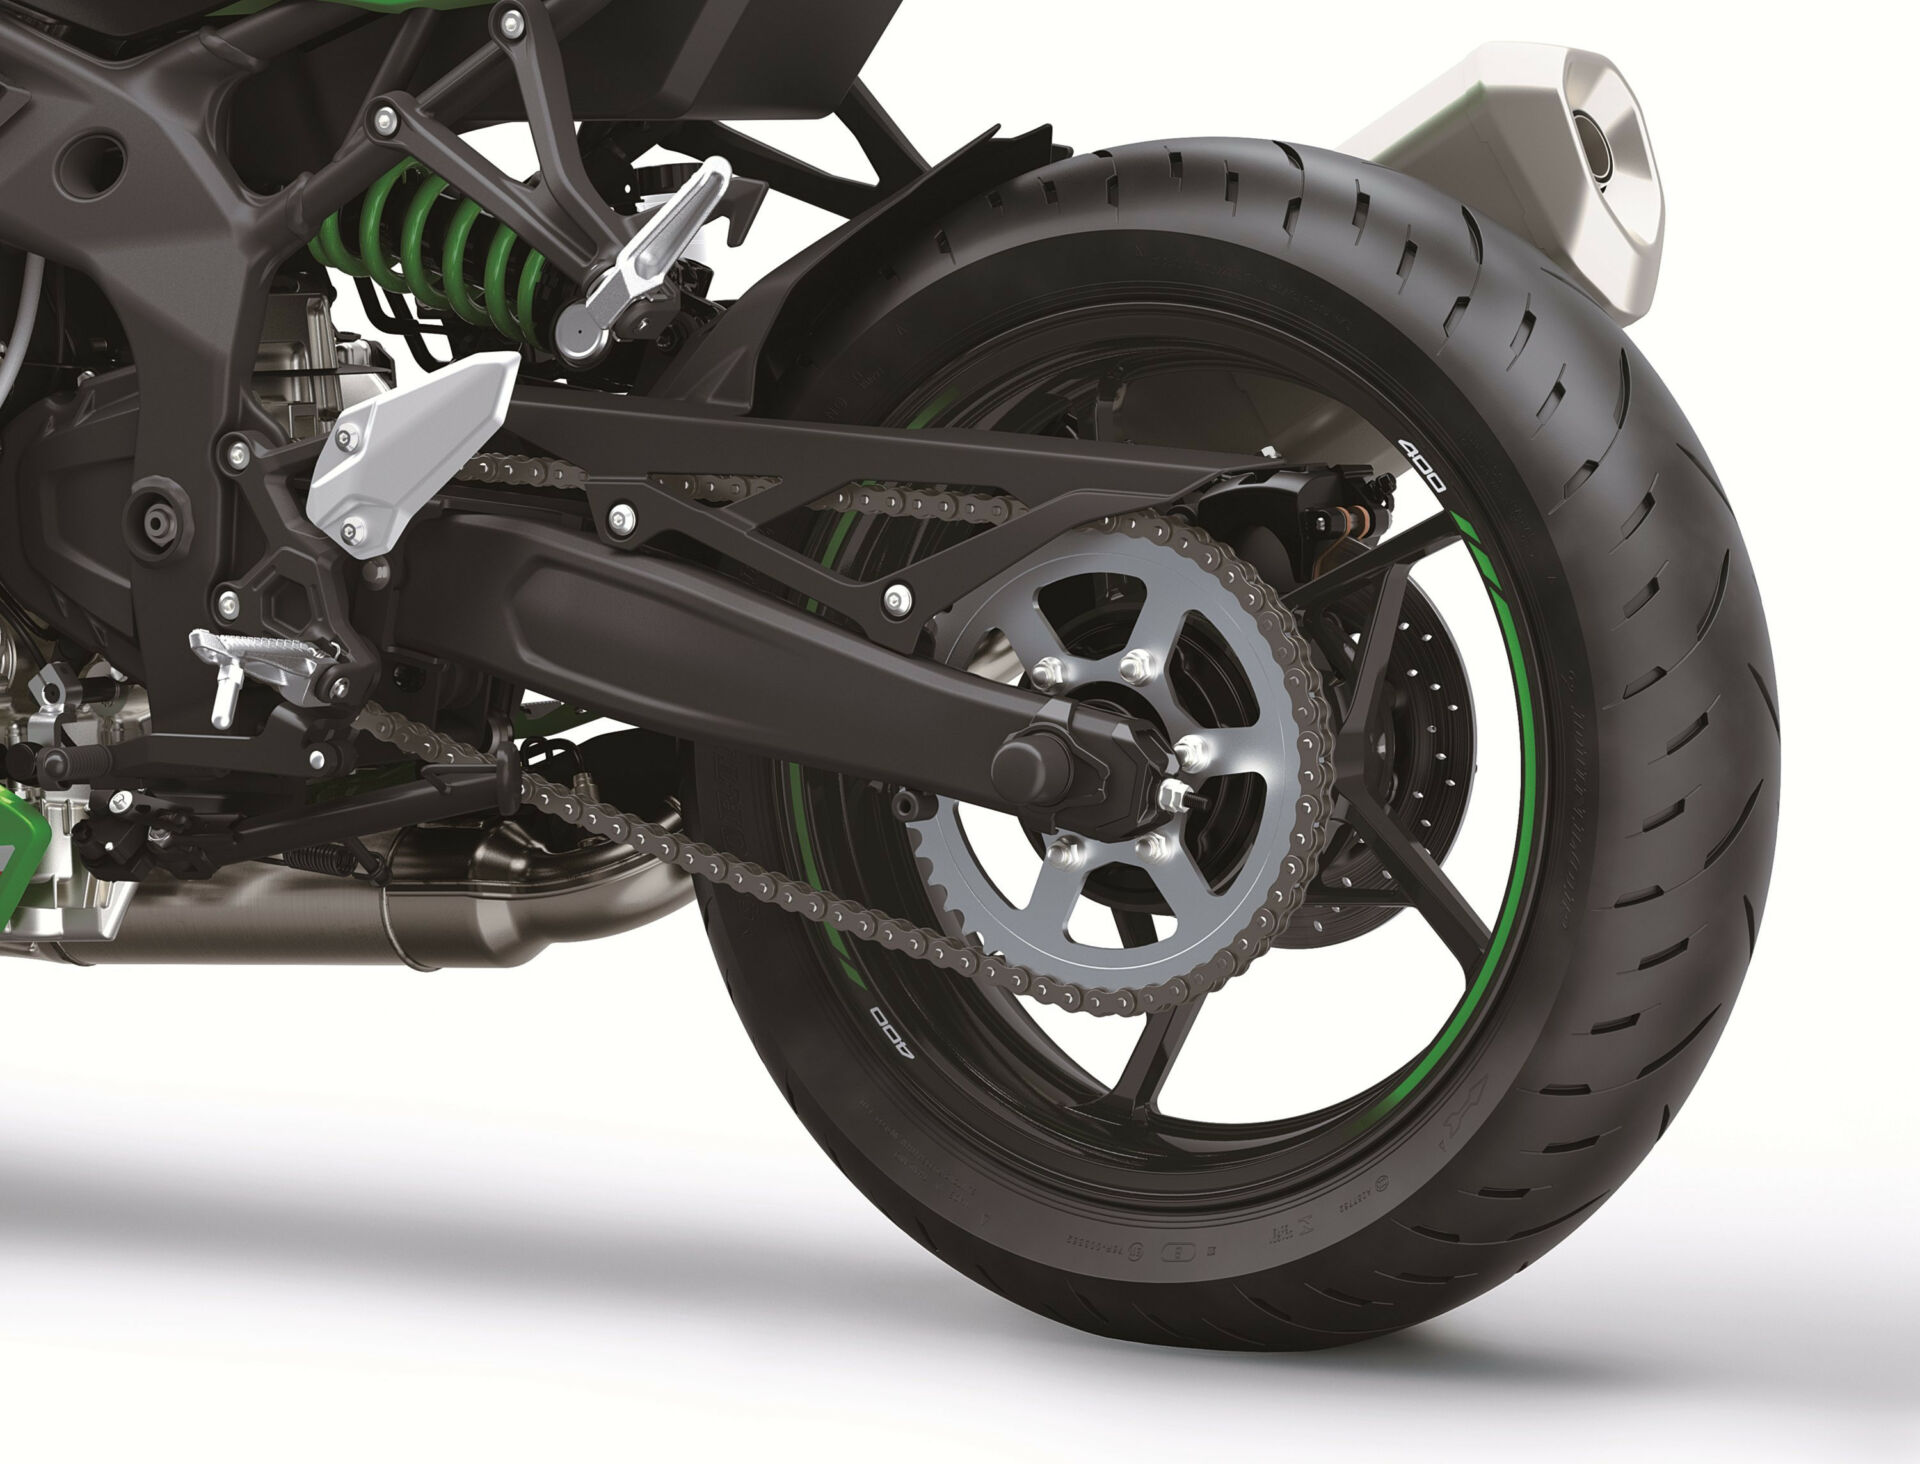 The Kawasaki Ninja ZX-4RR rolls out of the factory on Dunlop Sportmax® GPR-300 radial tires, including a wide 160/60-ZR17 rear. Photo courtesy Kawasaki.